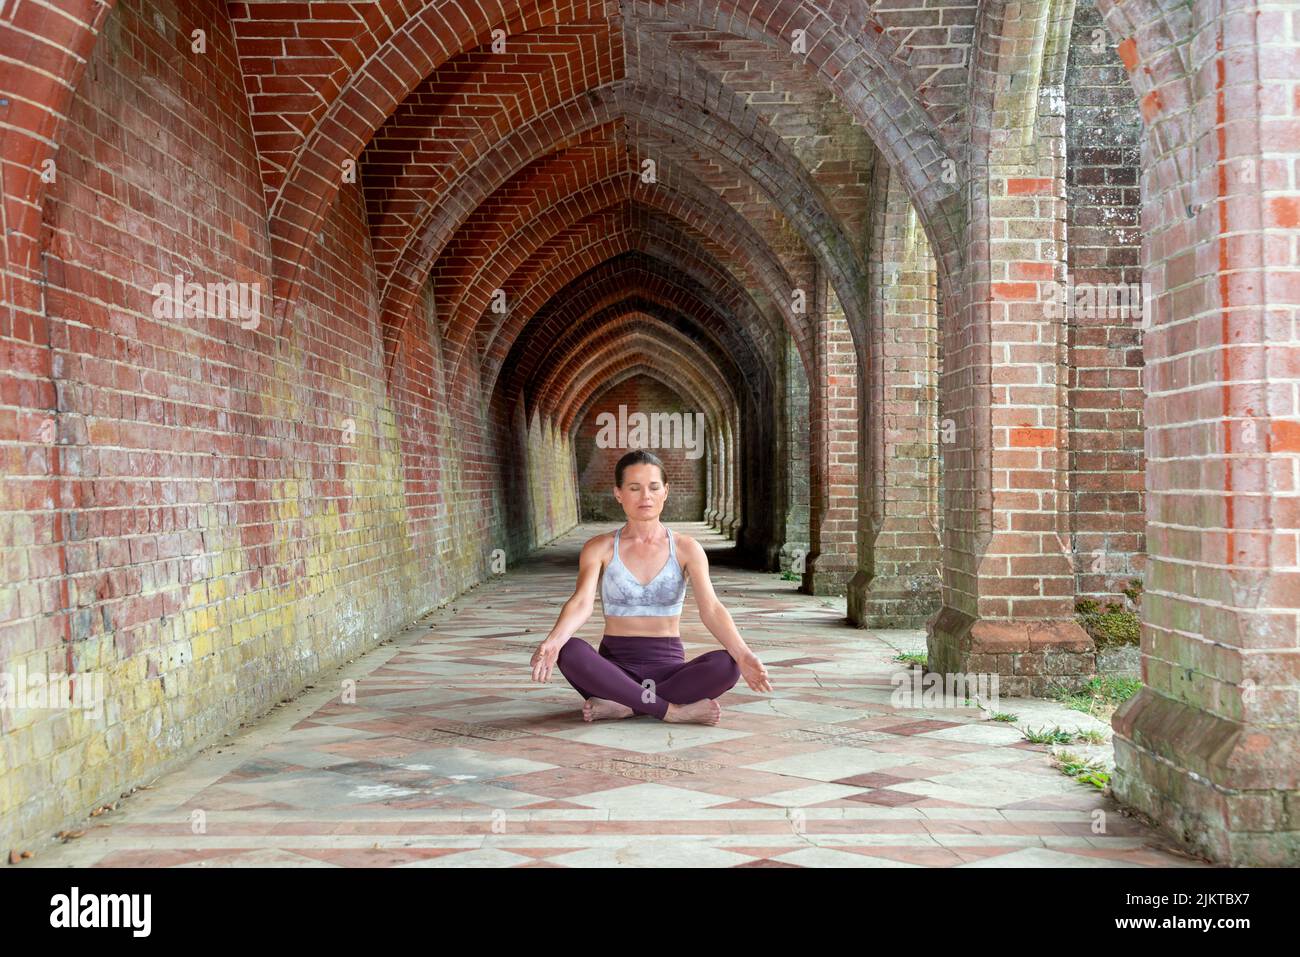 Sporty woman practicing yoga and meditating. Brick arches background. Stock Photo